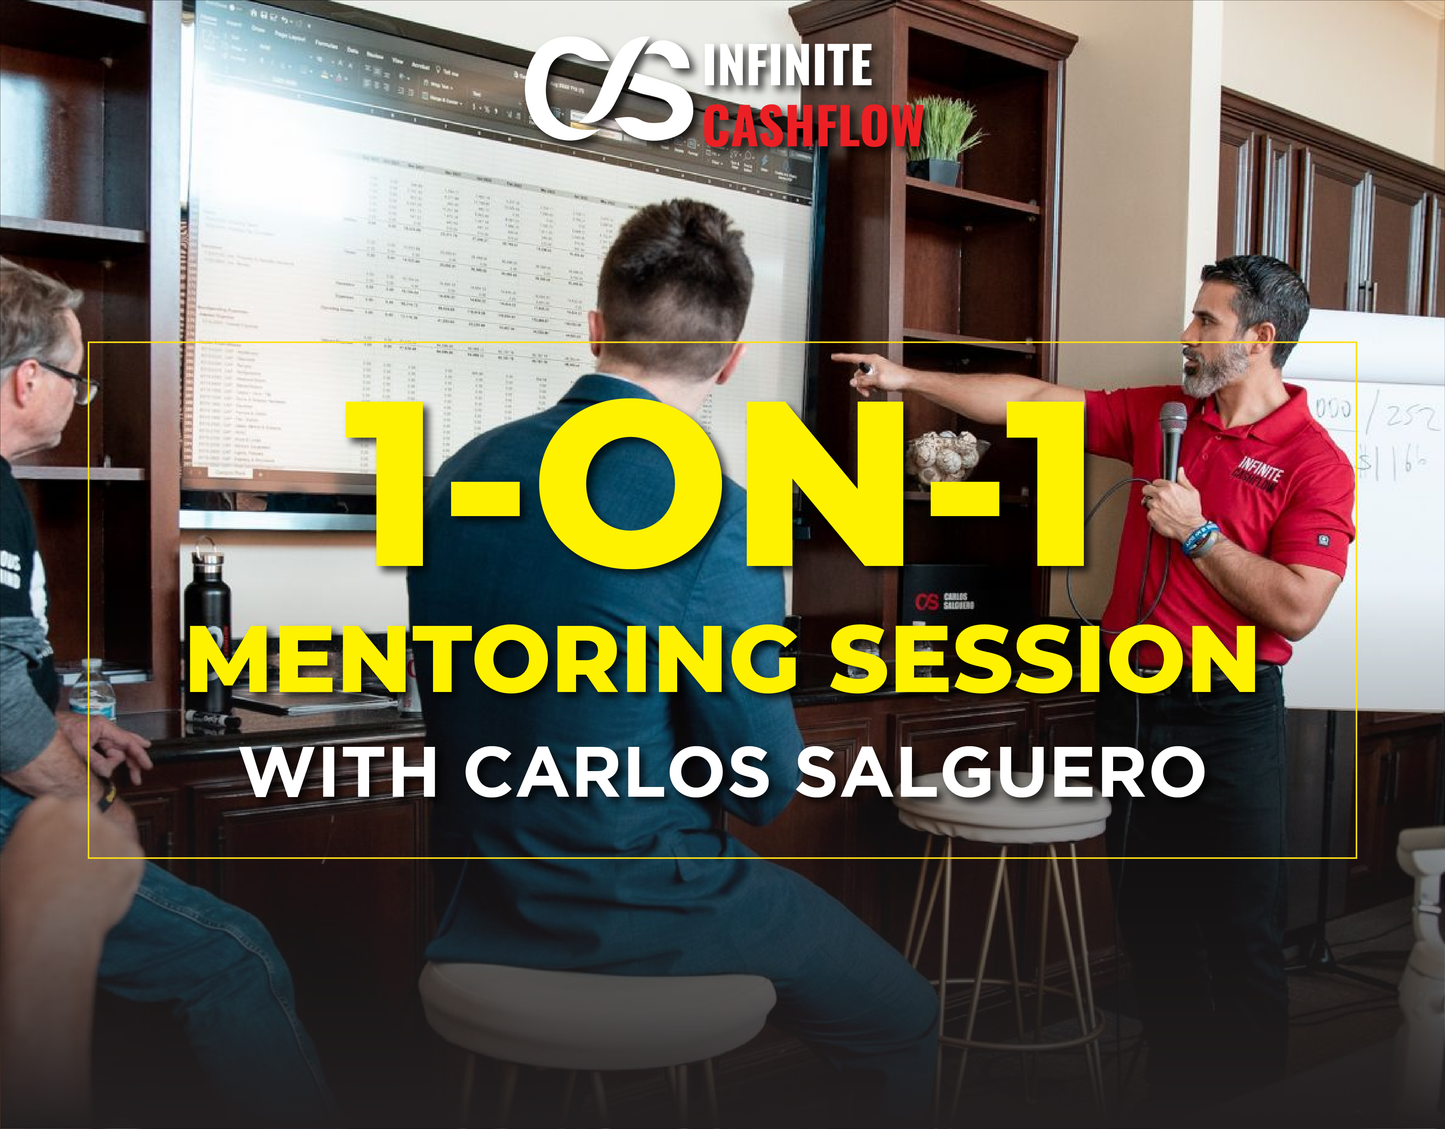 1-on-1 Mentoring Session